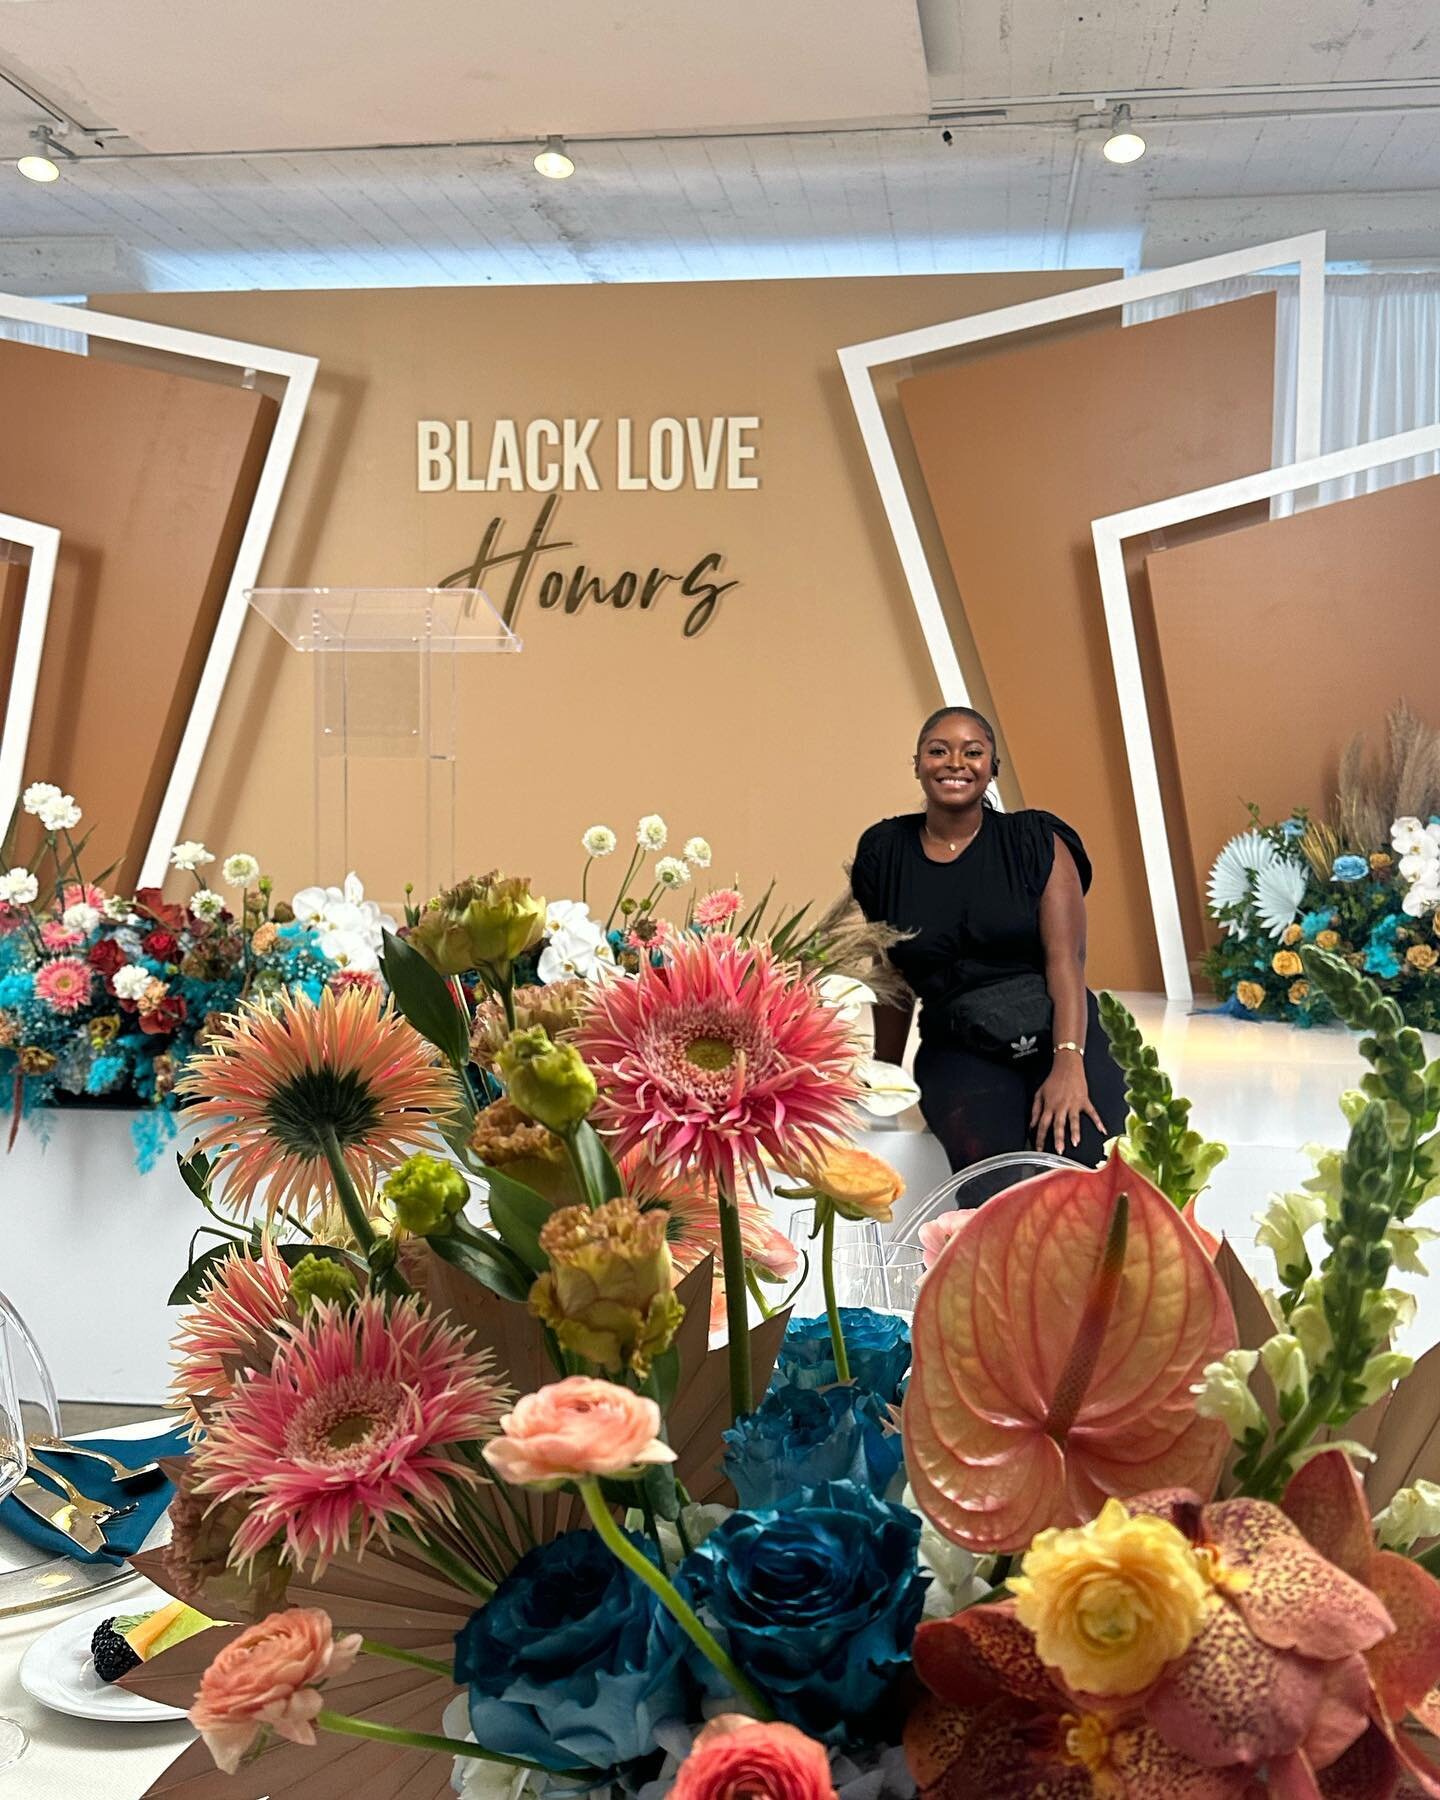 Still one of my favorites with @lenoiragency.la and @preferred_projects 💐💐💐 Absolutely love working with this team!!! #blacklove #blacklovehonors #privateevents